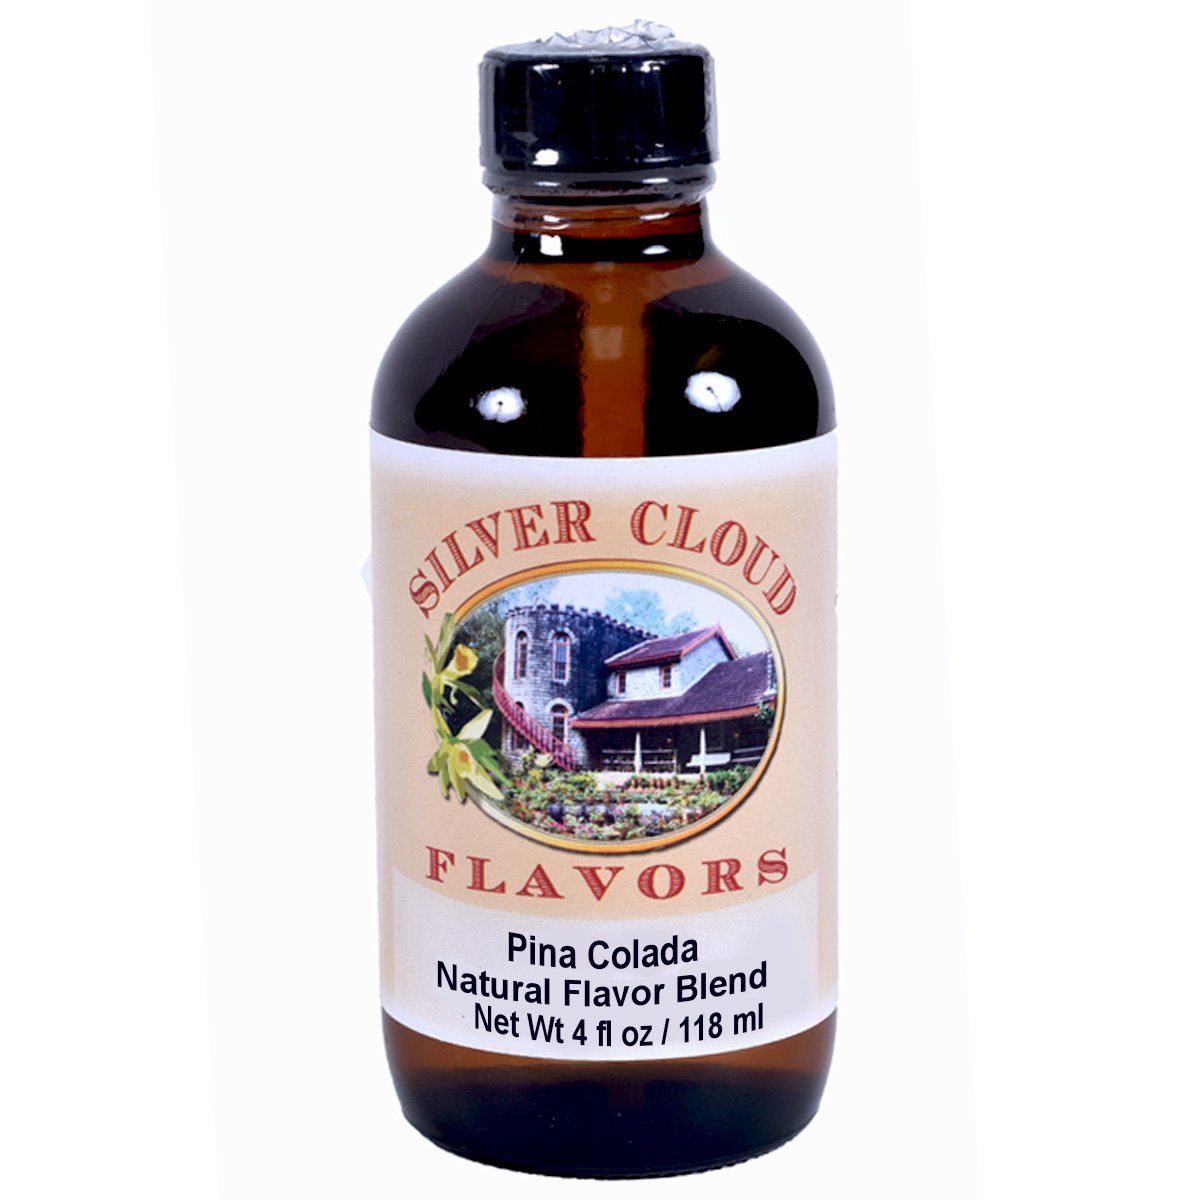 Pina Colada, Natural Flavor Blend Silver Cloud Extract - Bake Supply Plus